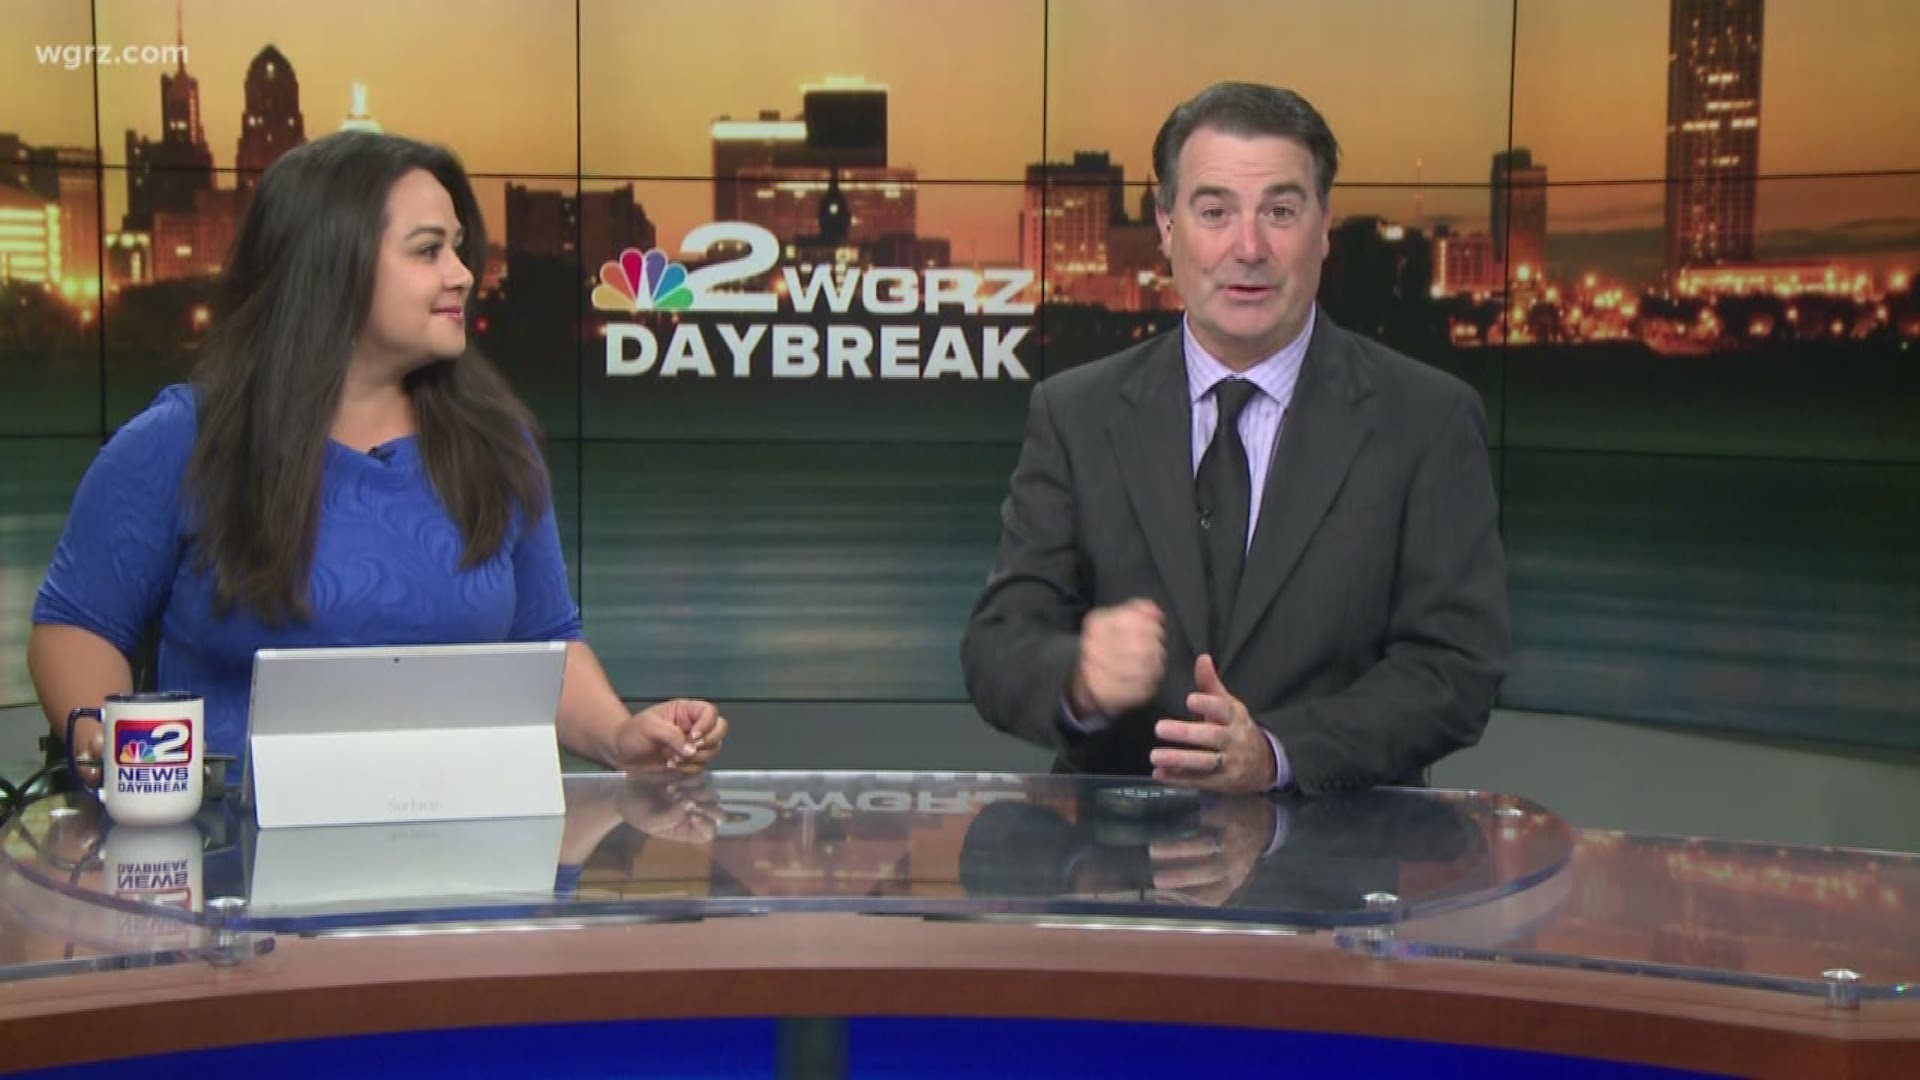 Daybreak's Heather Ly and Kevin O'Neill give a news and weather update at 6 a.m. Sunday morning.